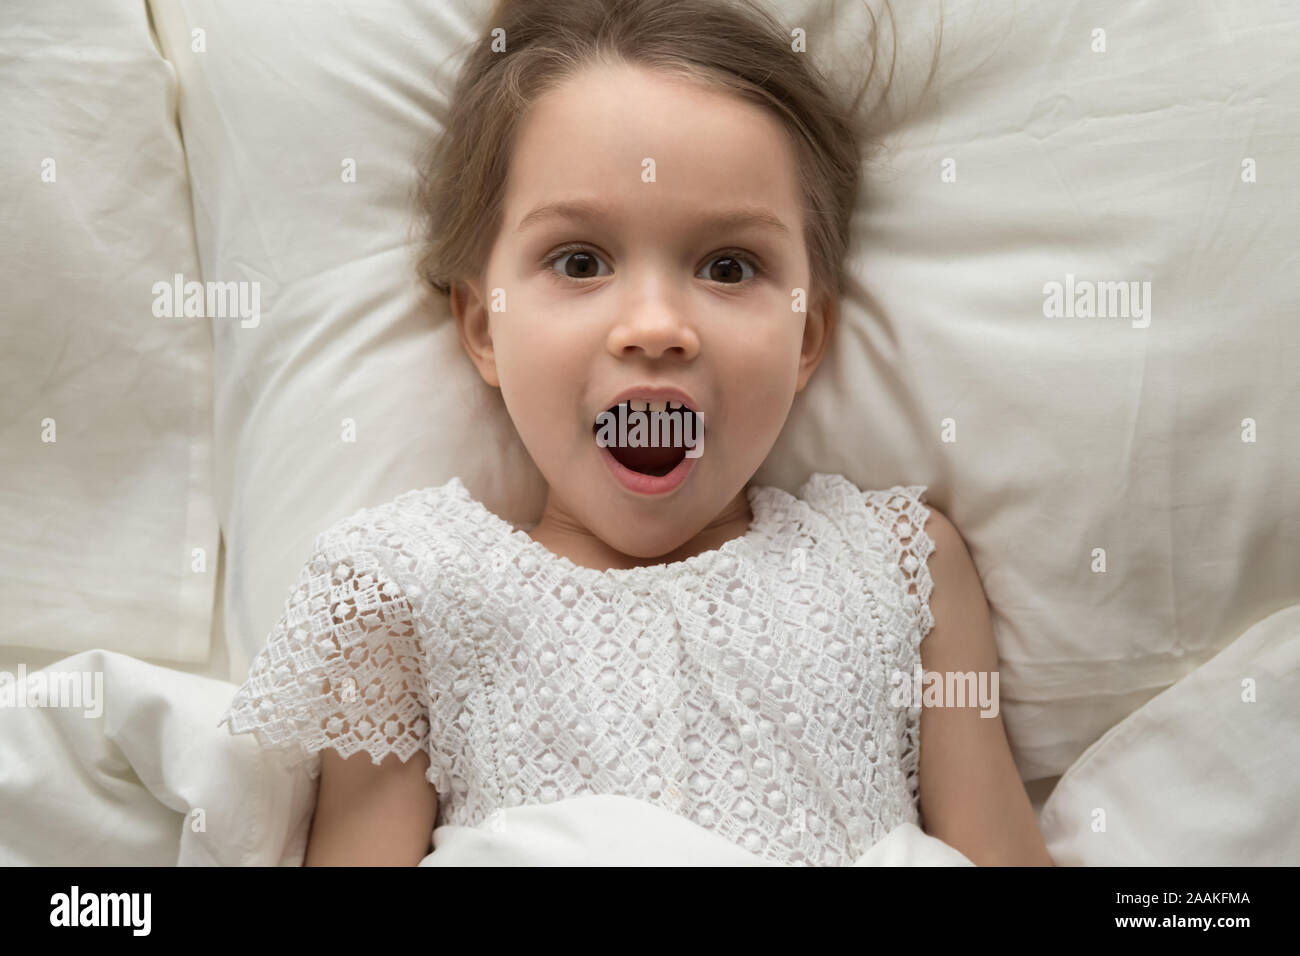 Top view of little girl lying in bed feel surprised Stock Photo